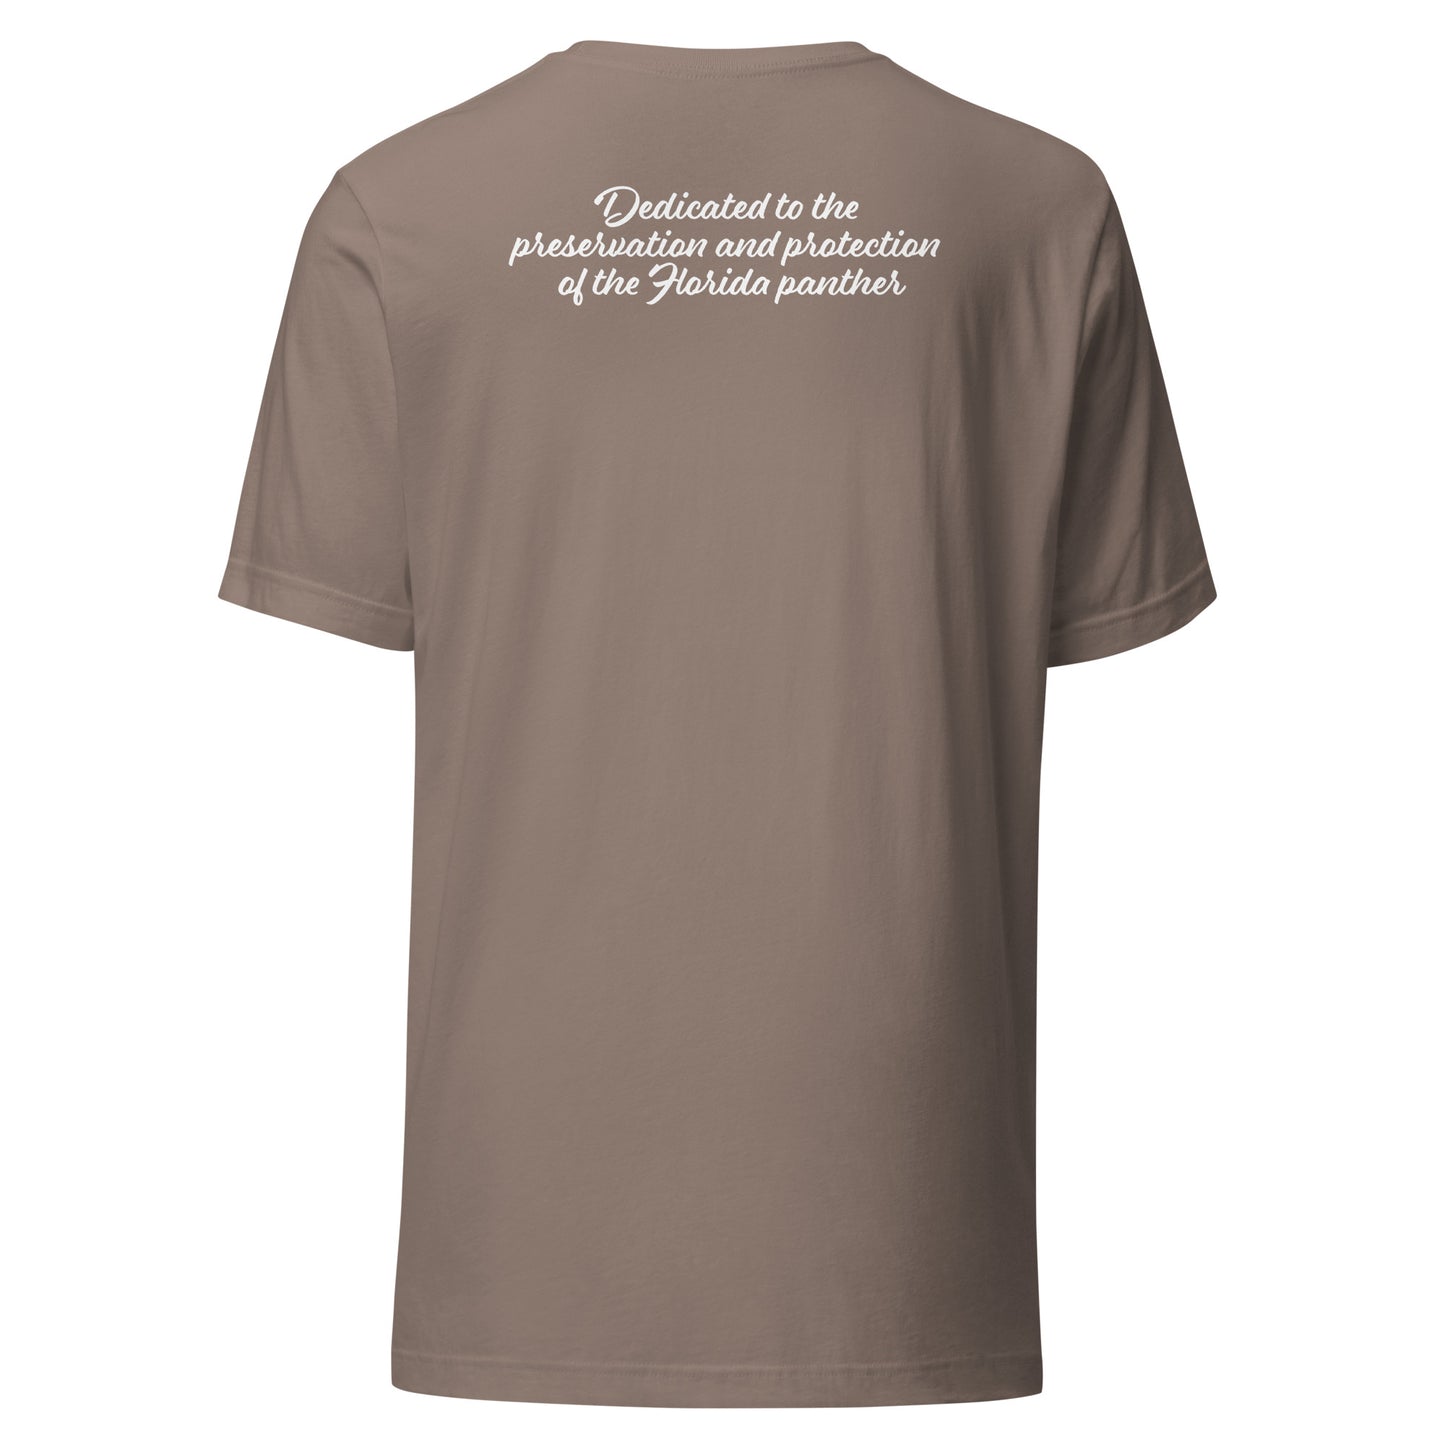 Friends of the Panther Refuge t-shirt